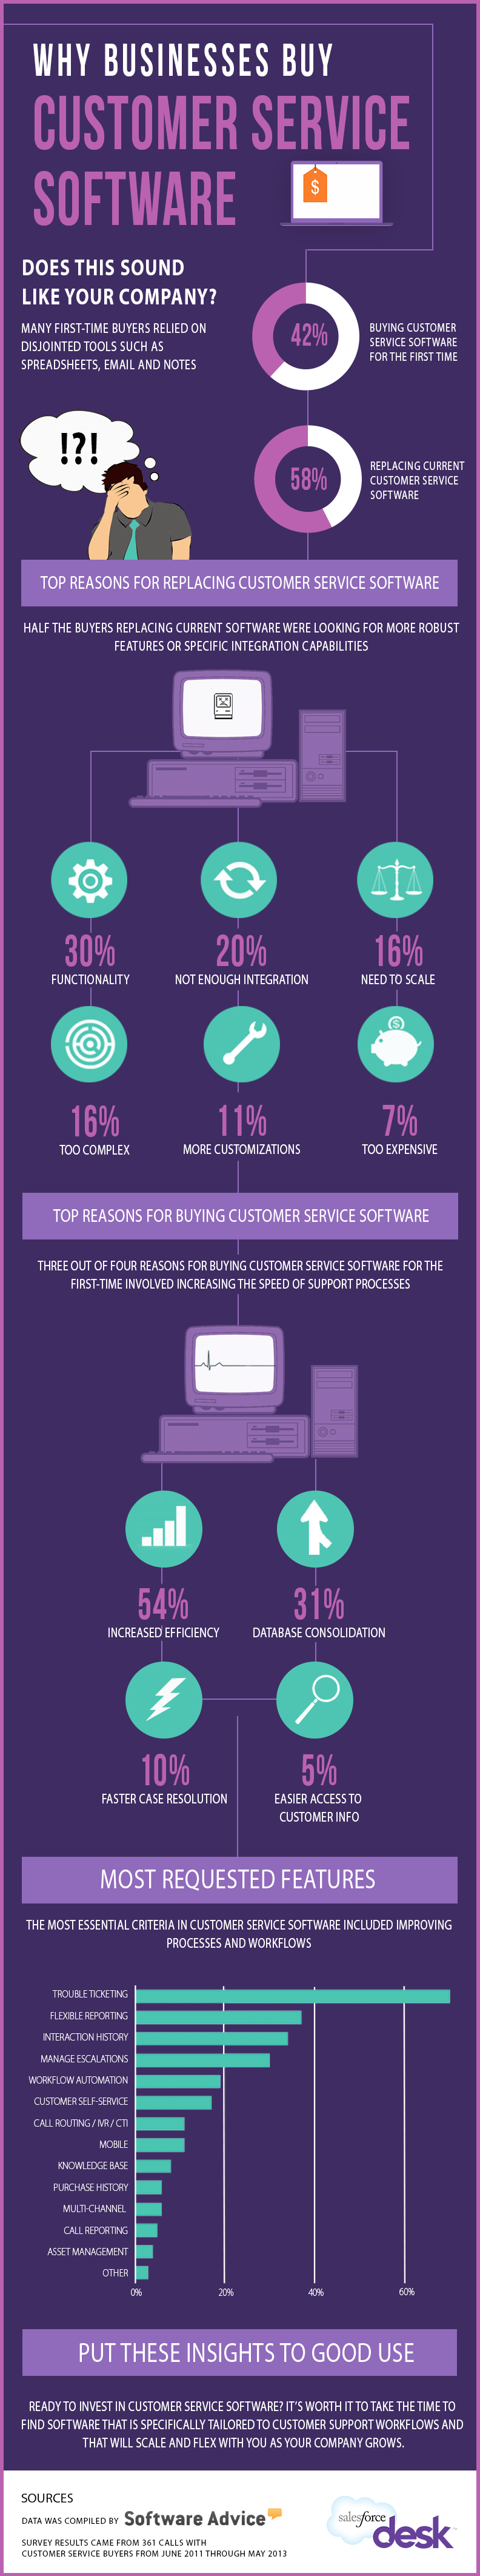 Why businesses buy customer service software